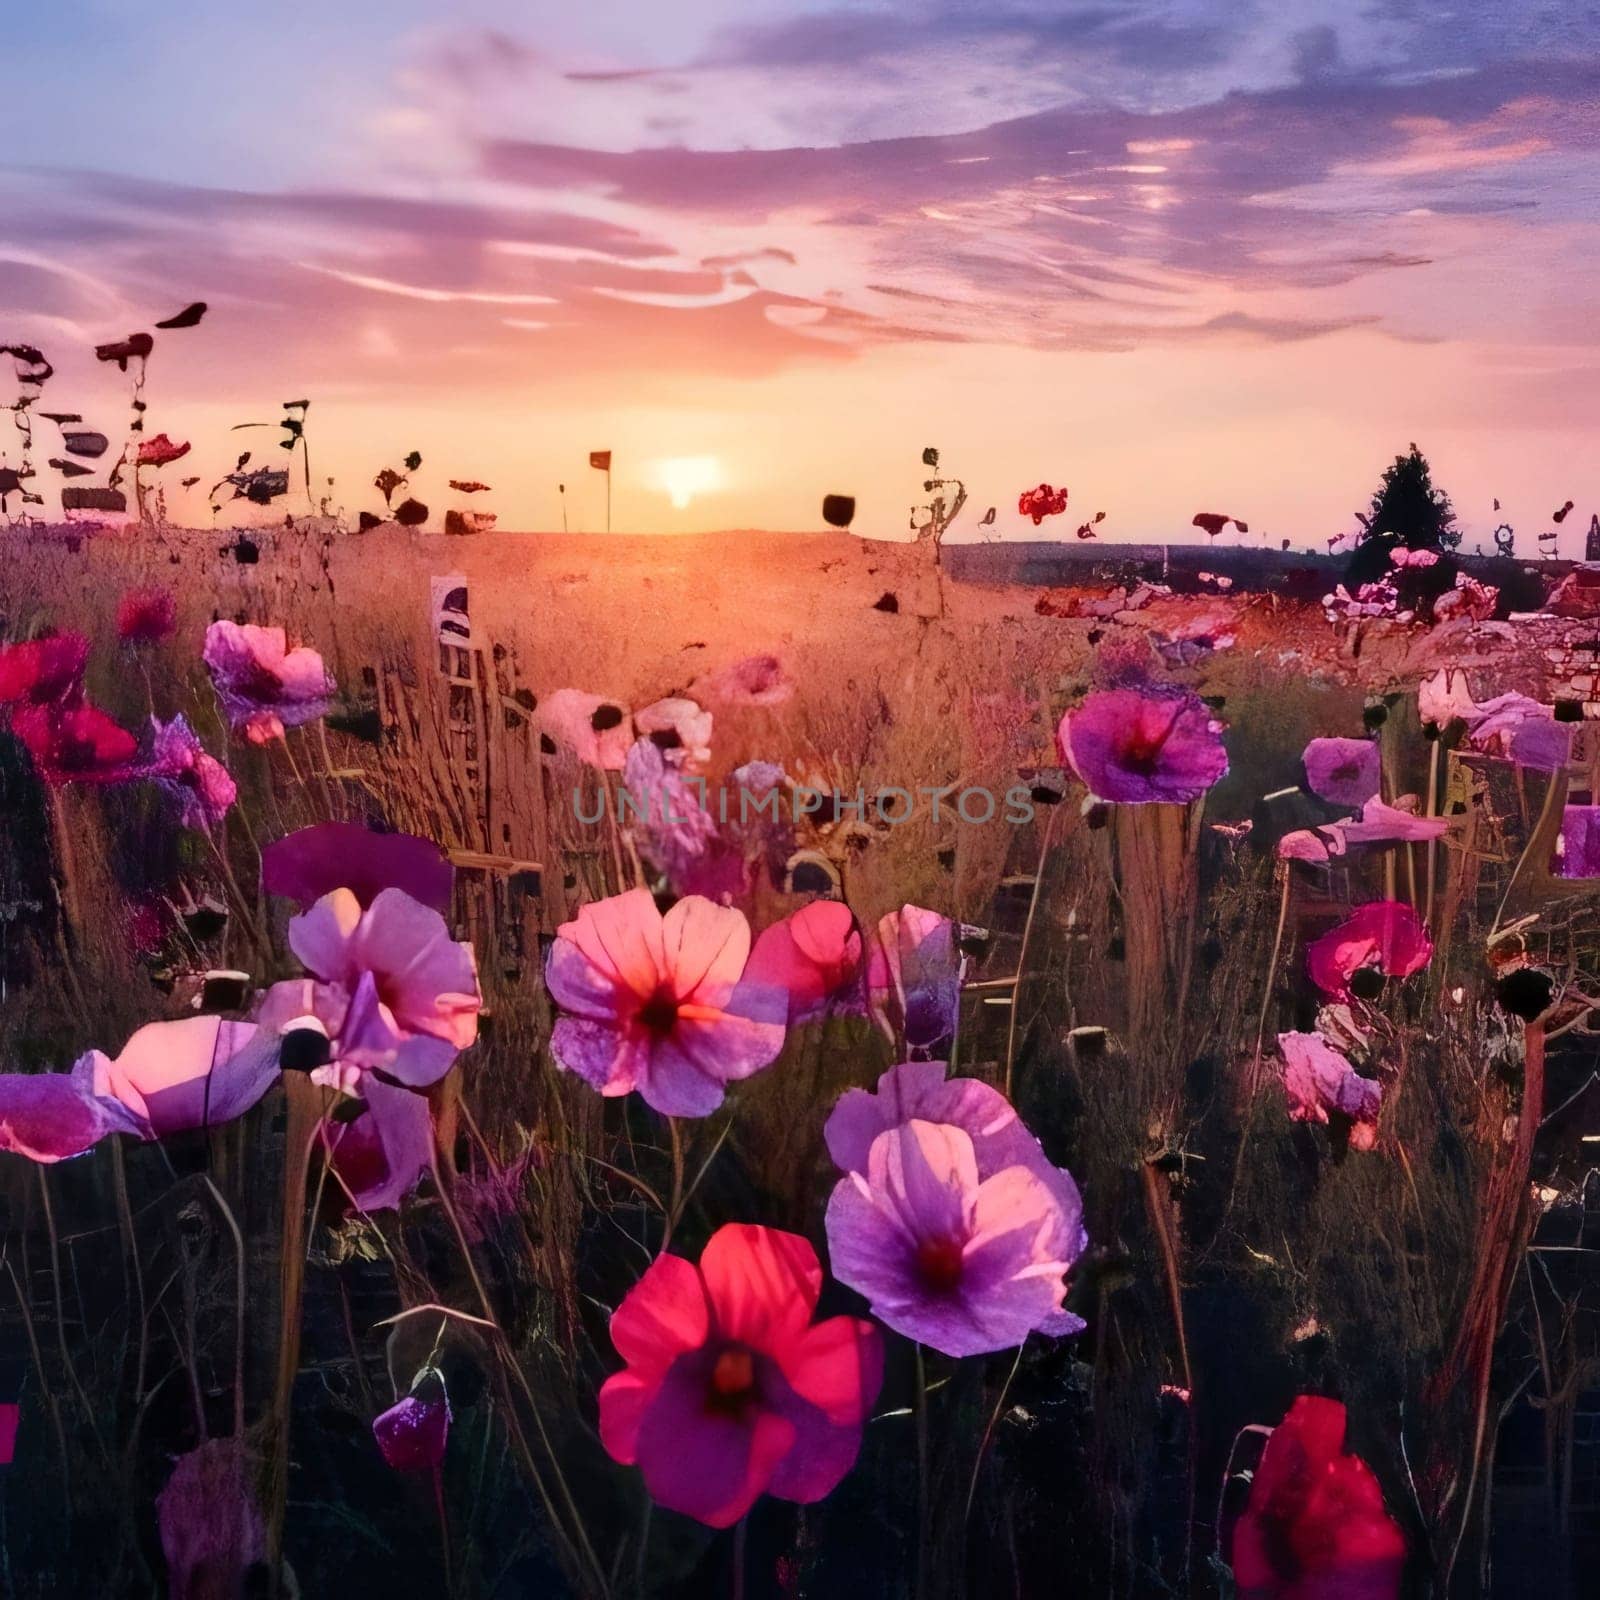 Illustration of a field full of pink flowers in the sunshine, at sunset. Flowering flowers, a symbol of spring, new life. A joyful time of nature waking up to life.